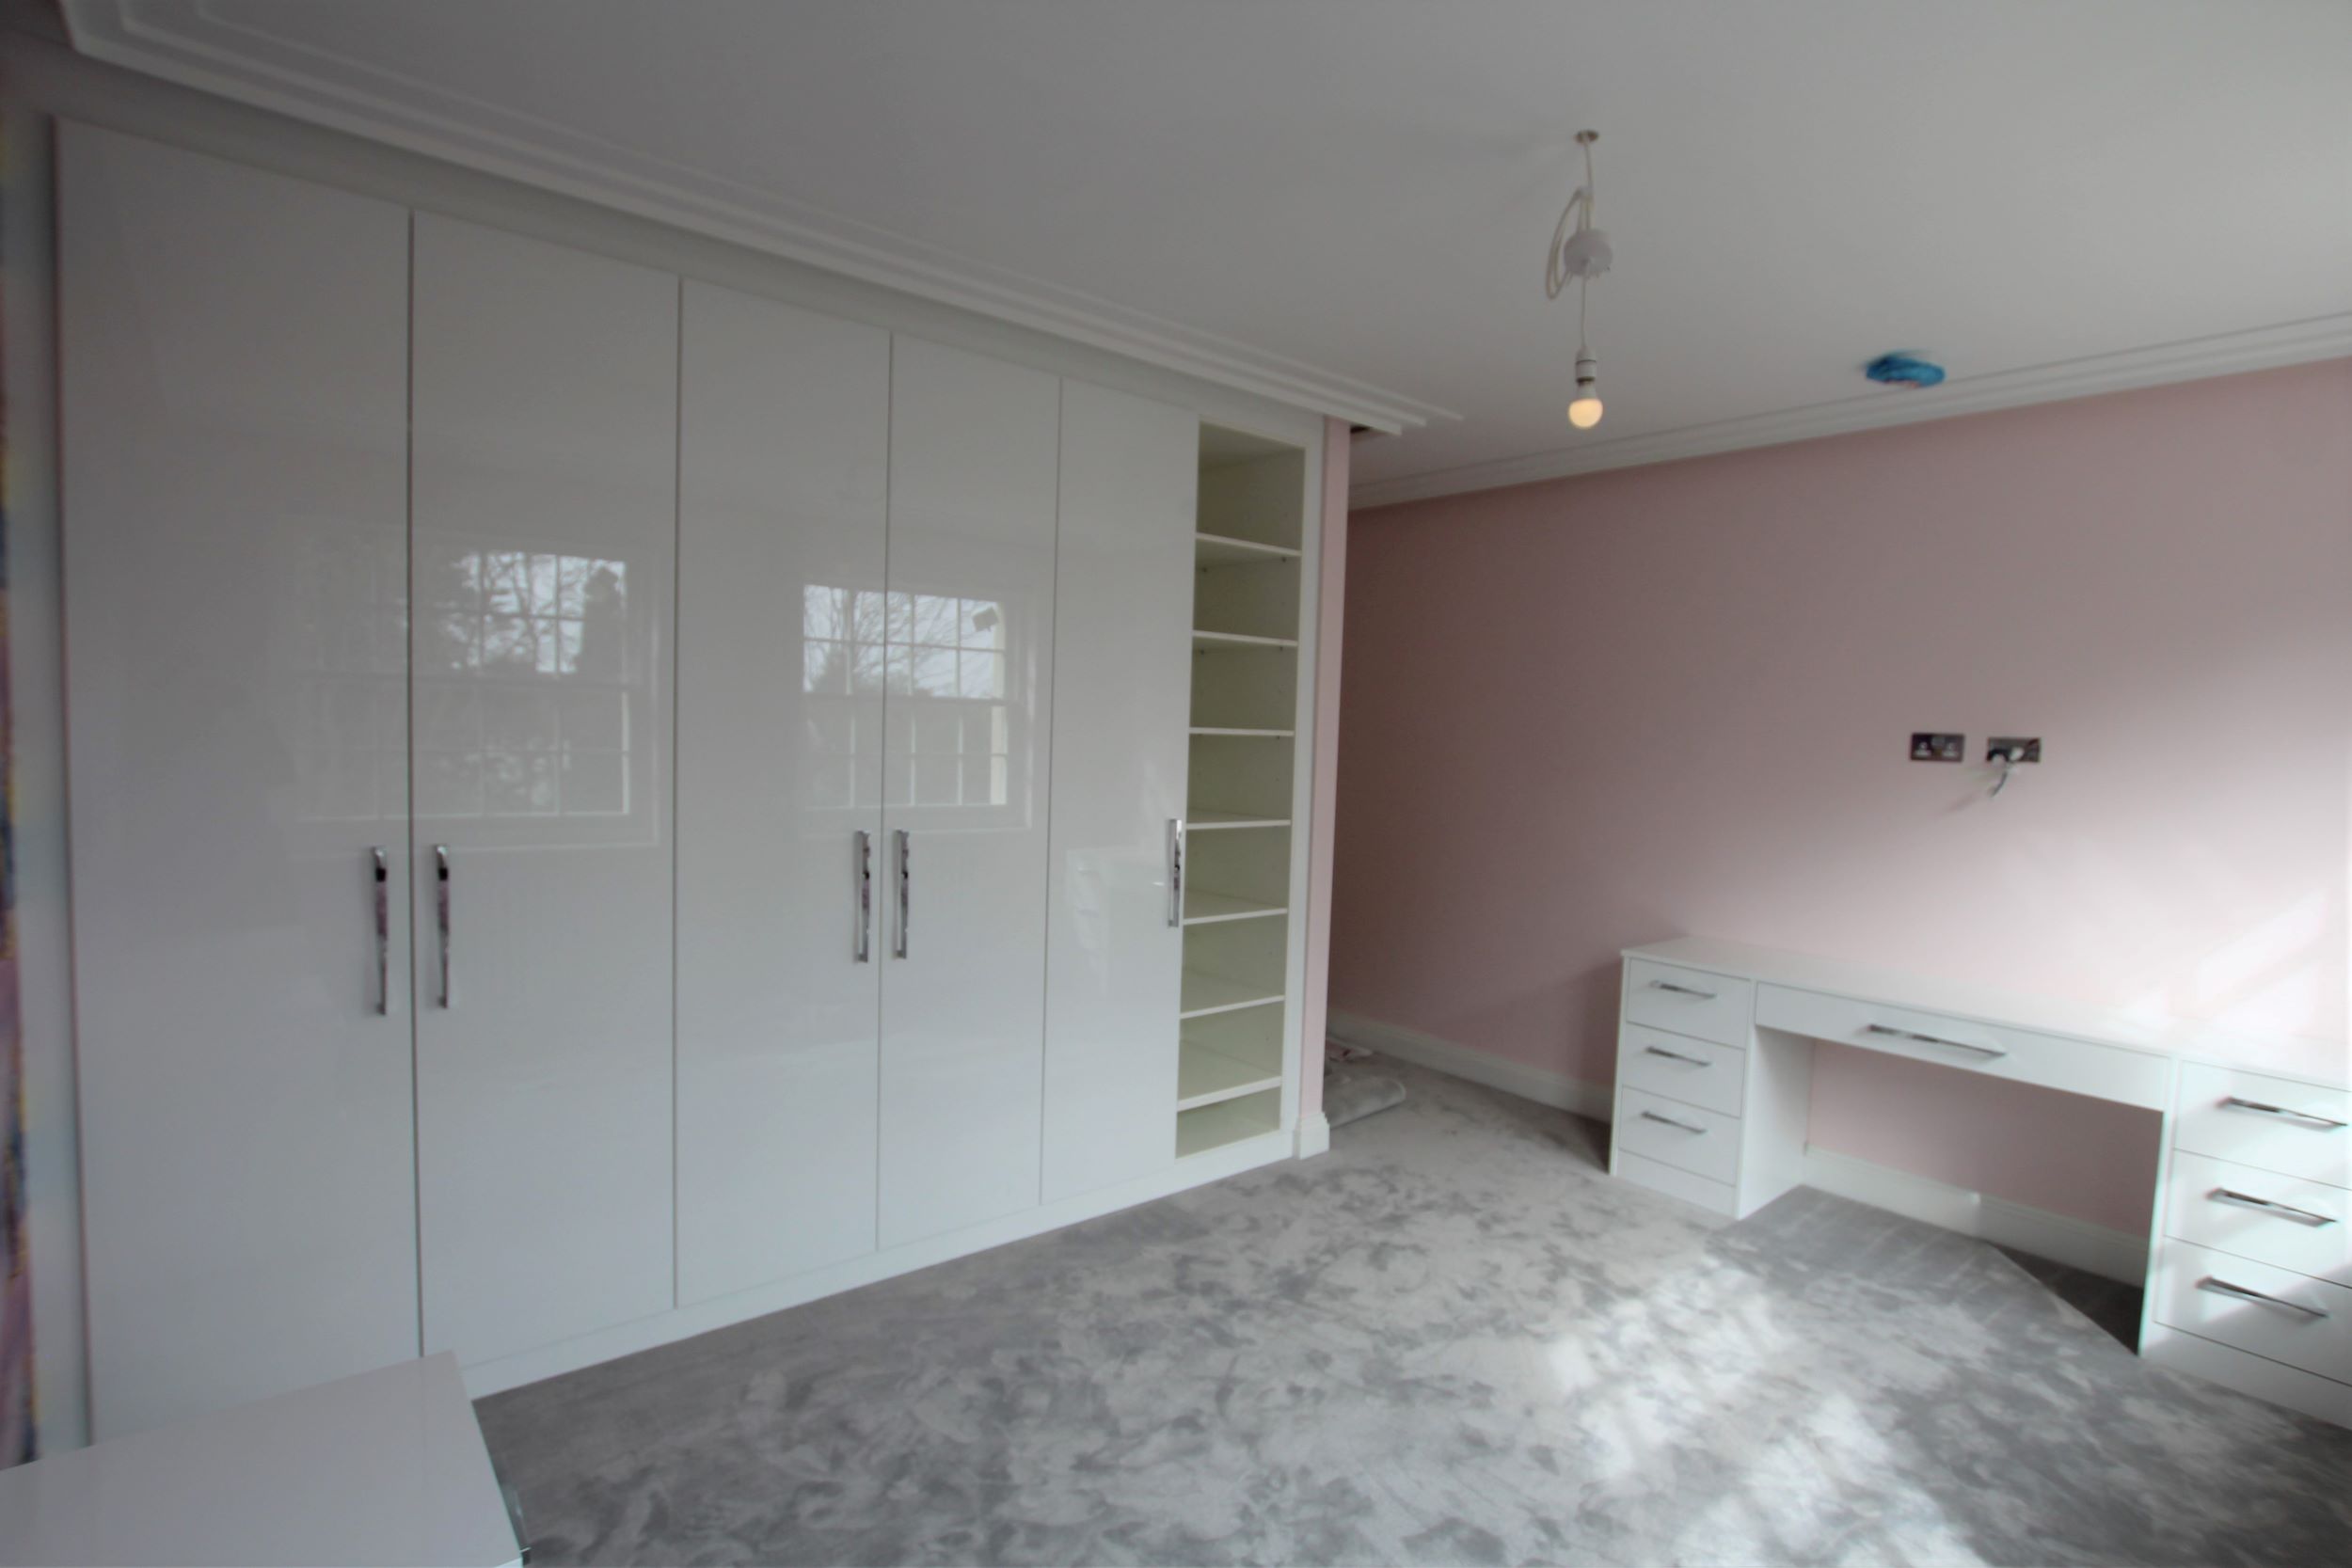 Bespoke bedroom designed, supplied and installed in Whetstone by Hampdens KB